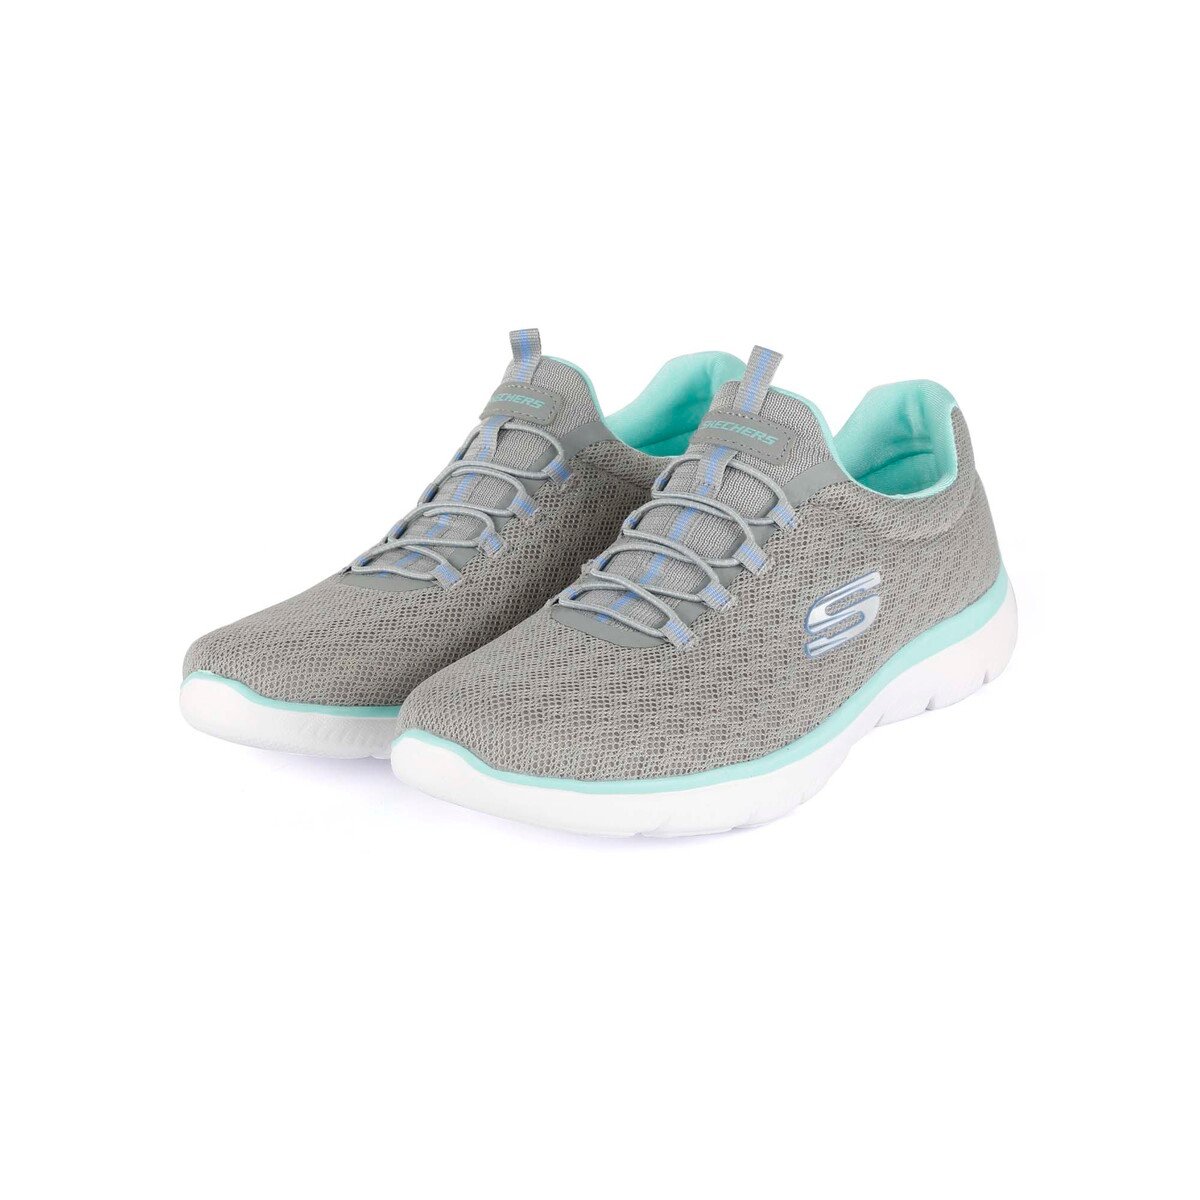 Skechers Women's Sports Shoes 149199-GYMN, 36.5 Online at Best Price | Ladies Sports Shoes | UAE